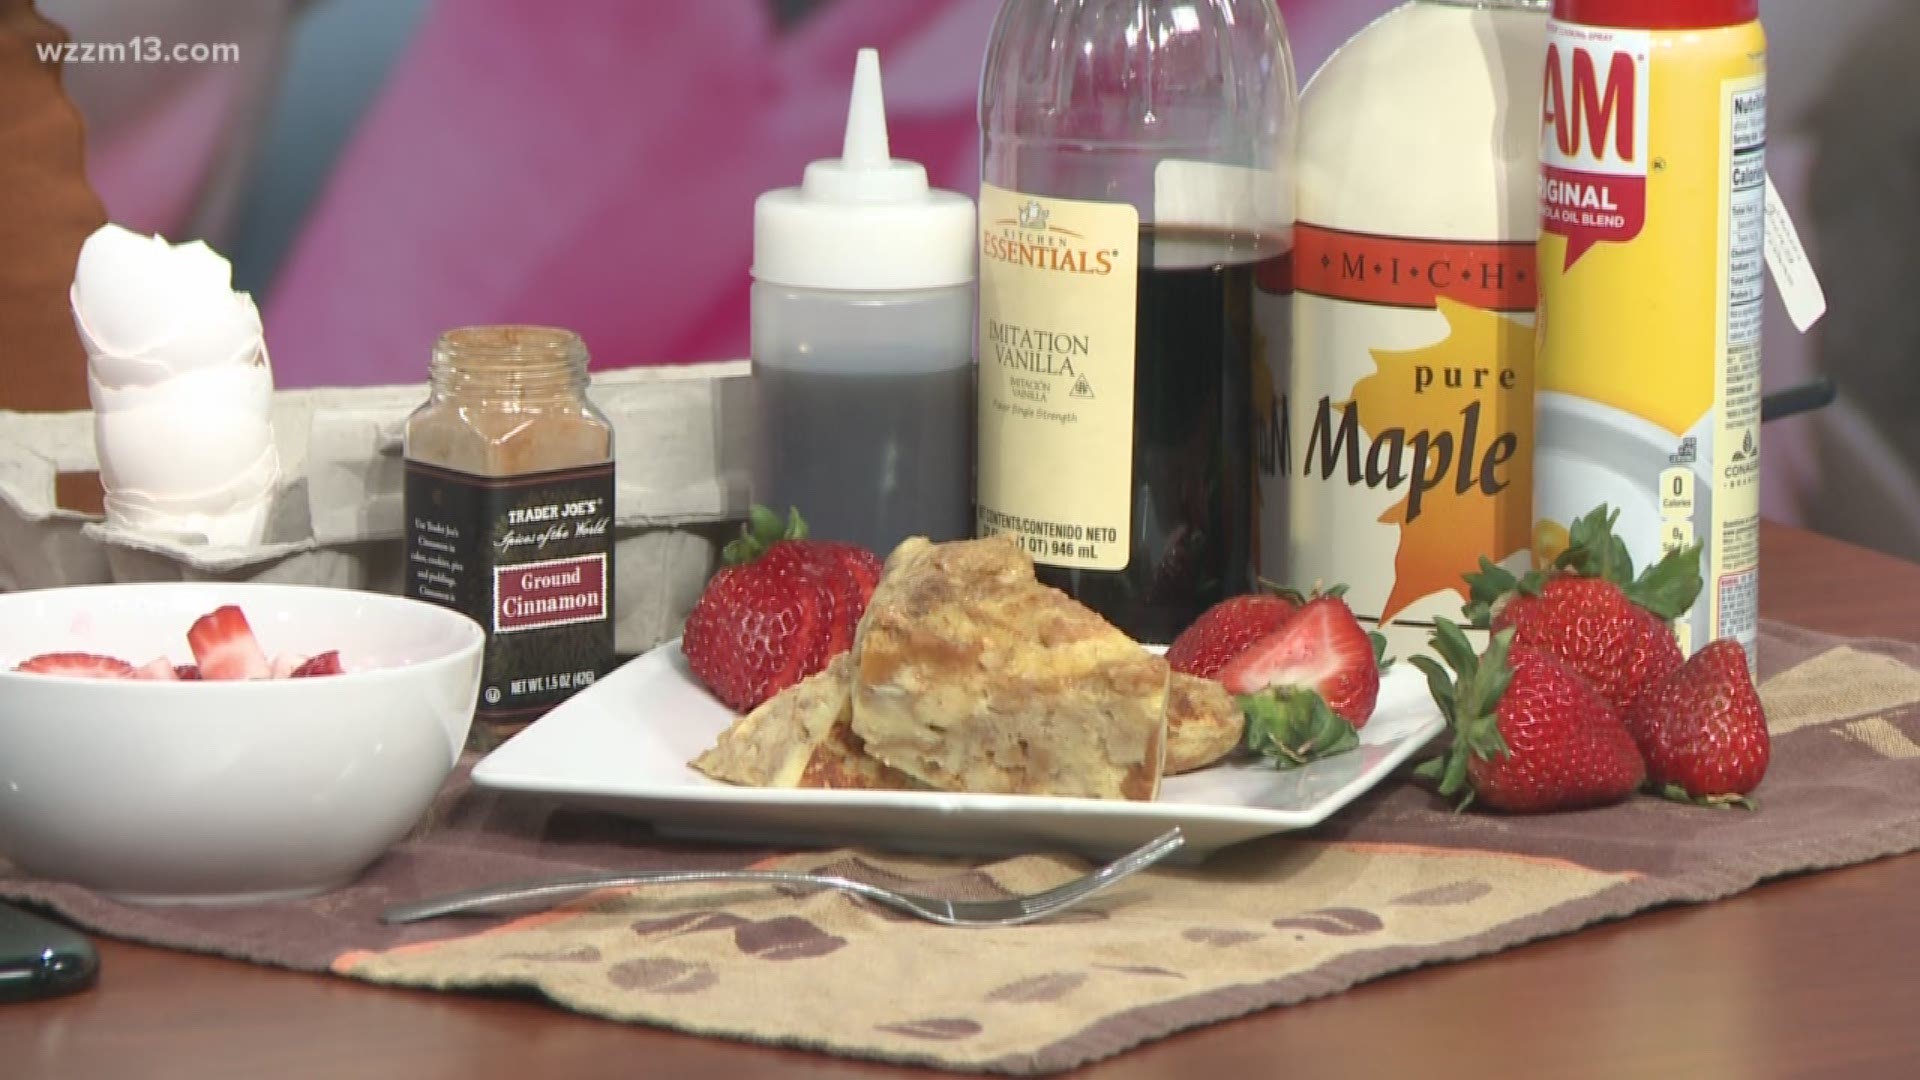 The Ginger Chef shows off an easy-to-make recipe for mom.